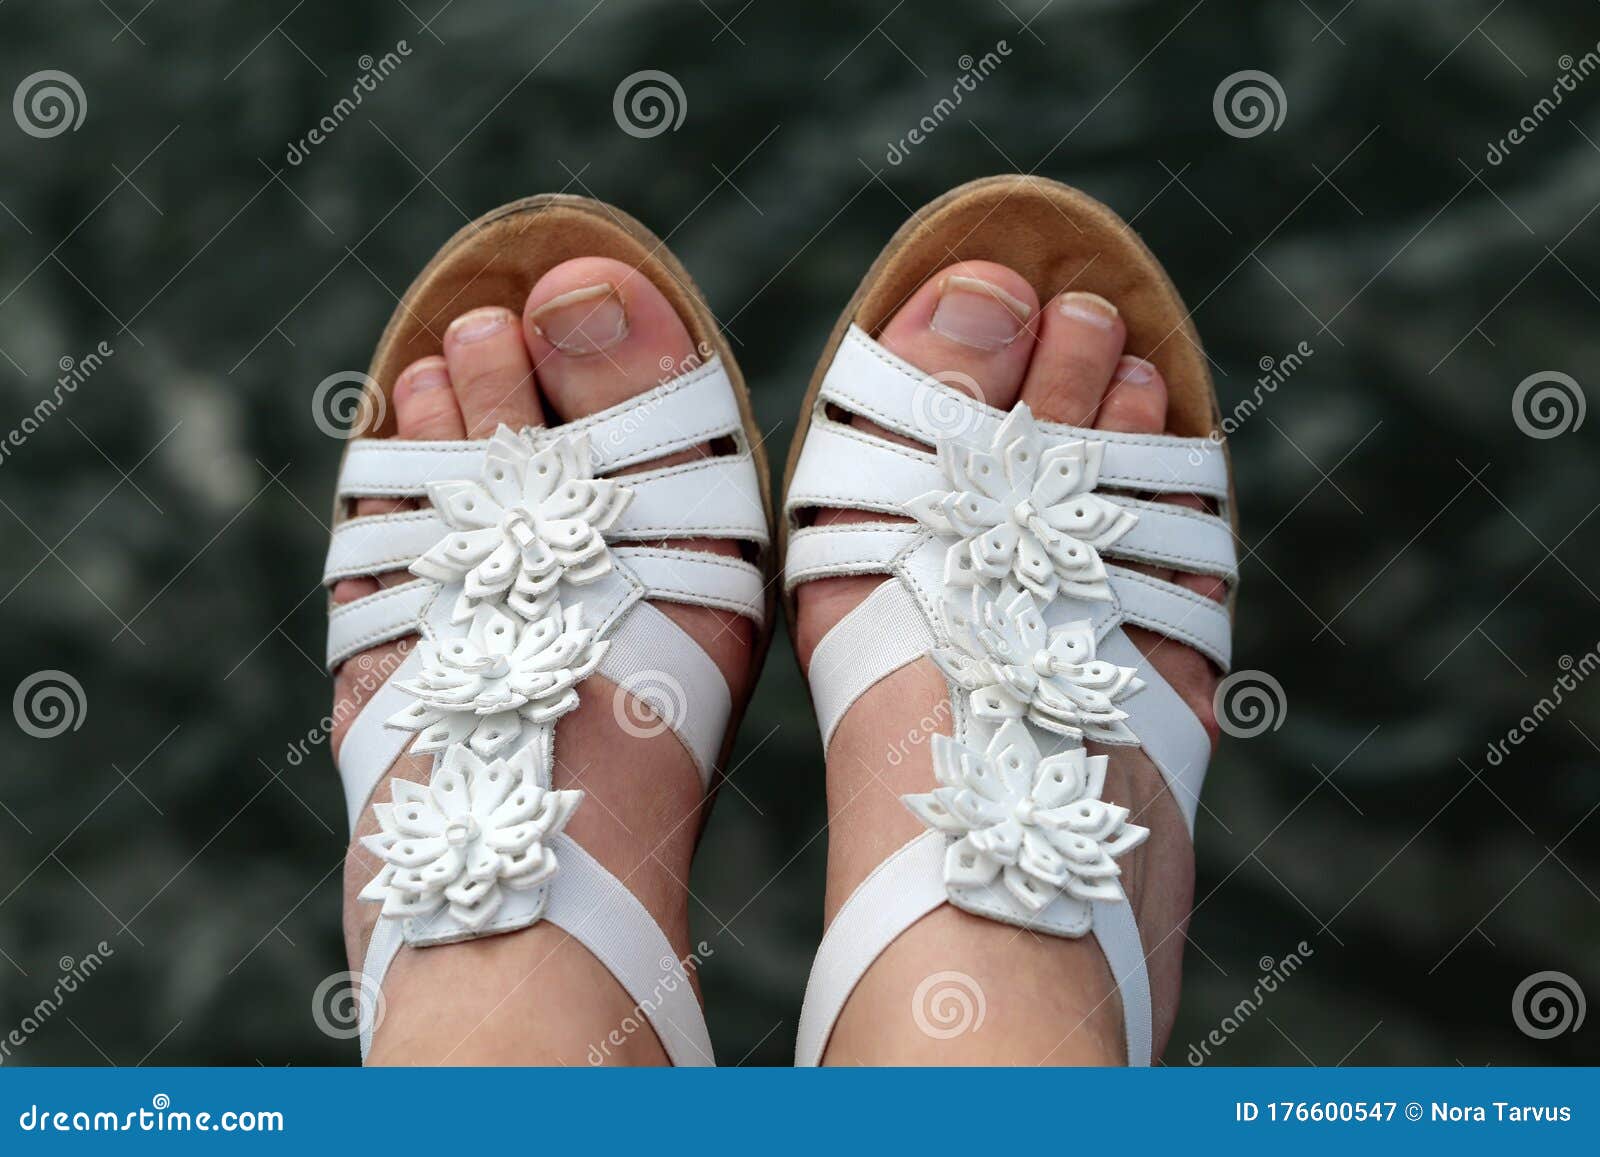 Caucasian Woman Wearing White Leather Strap Sandals with Flower Decor, Feet  in a Closeup Stock Image - Image of beauty, girl: 176600547